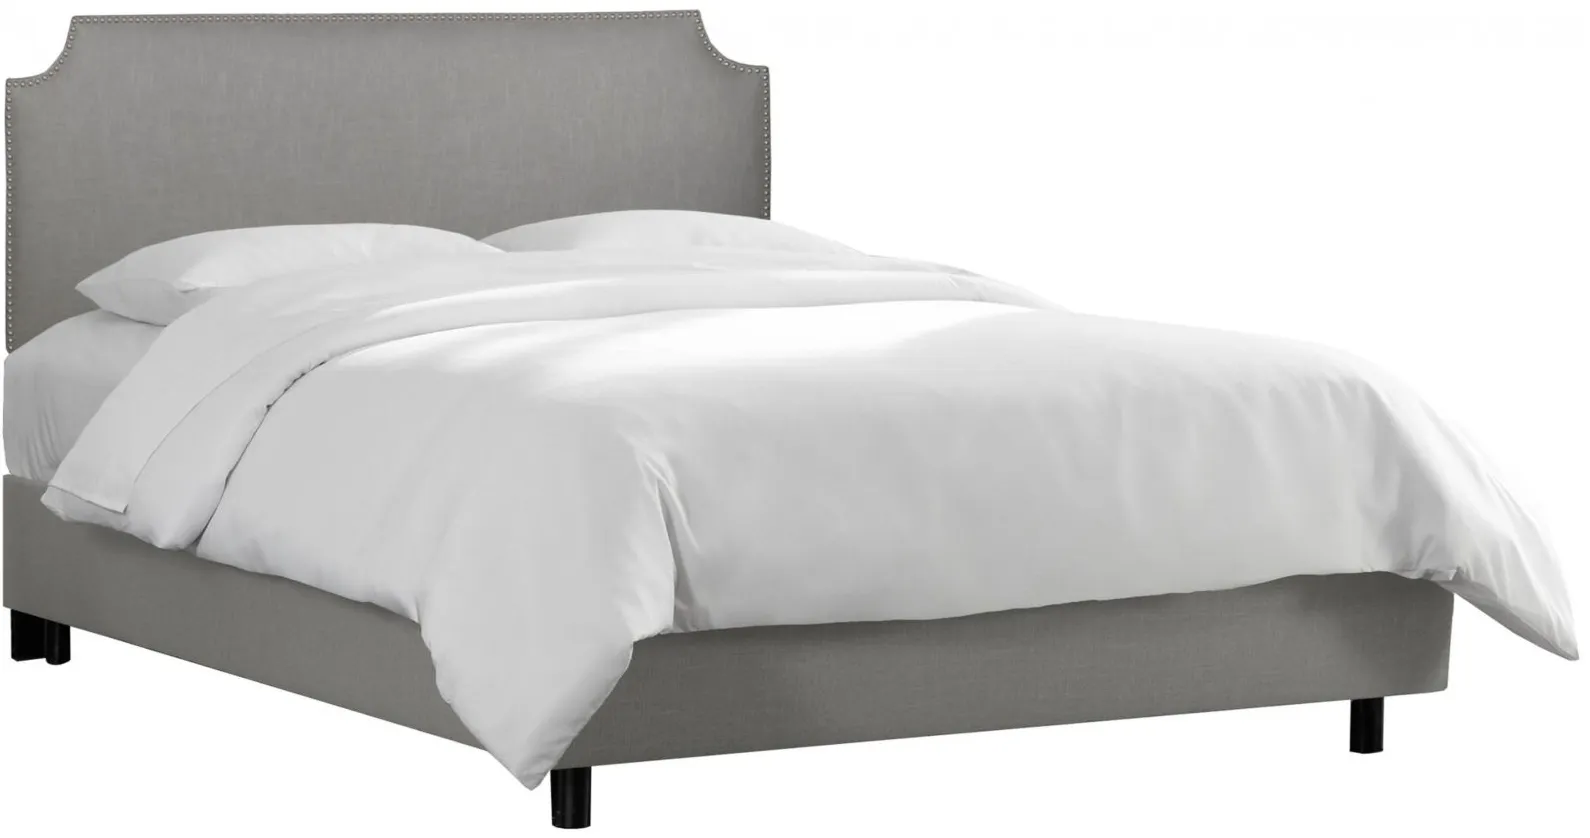 McGee Bed in Linen Gray by Skyline